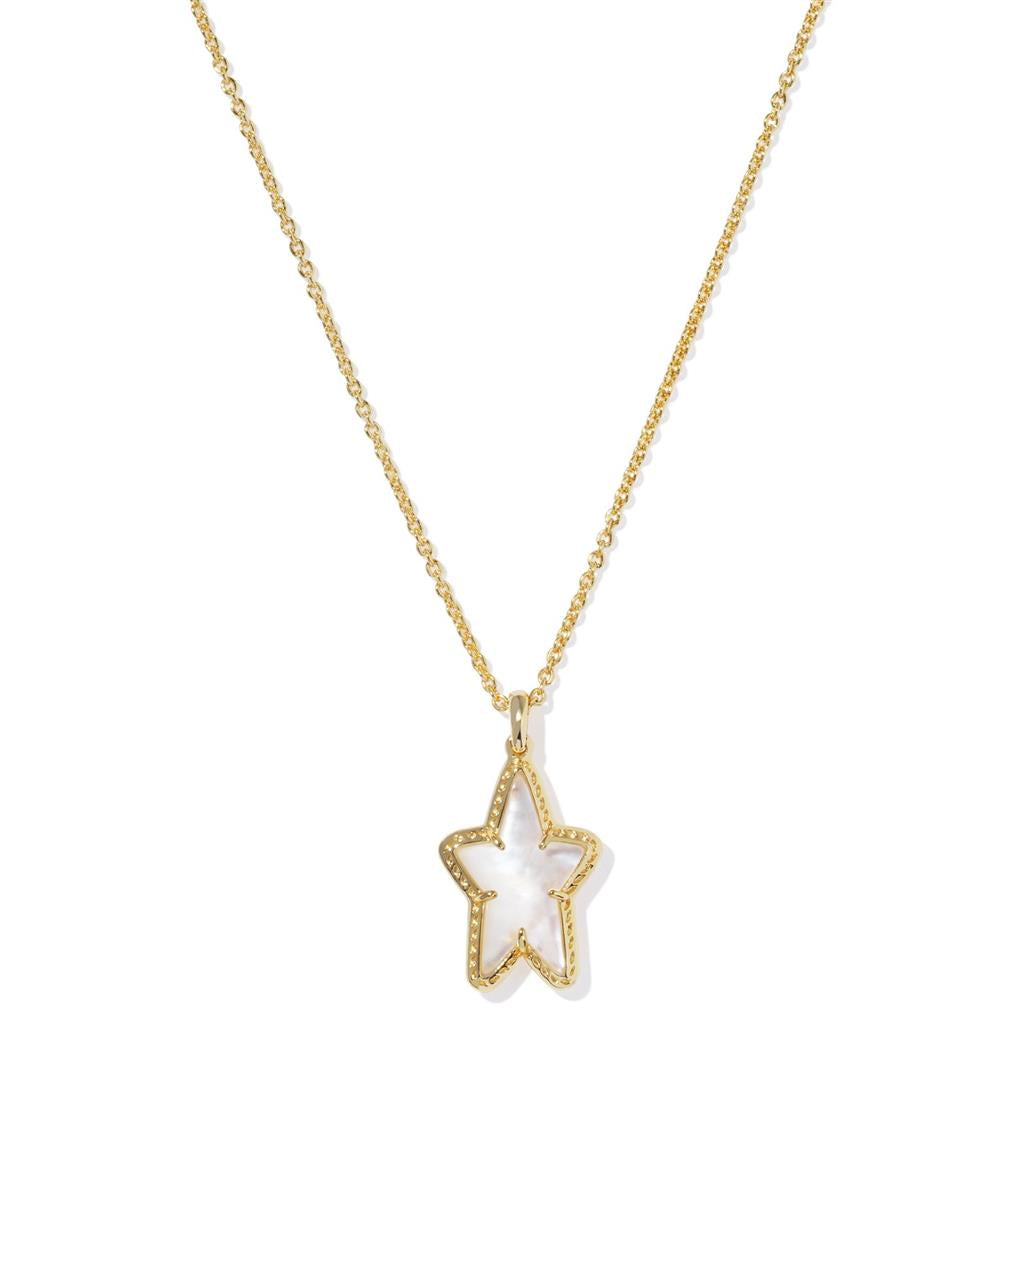 ADA STAR SHORT PENDANT NECKLACE GOLD IVORY MOTHER OF PEARL